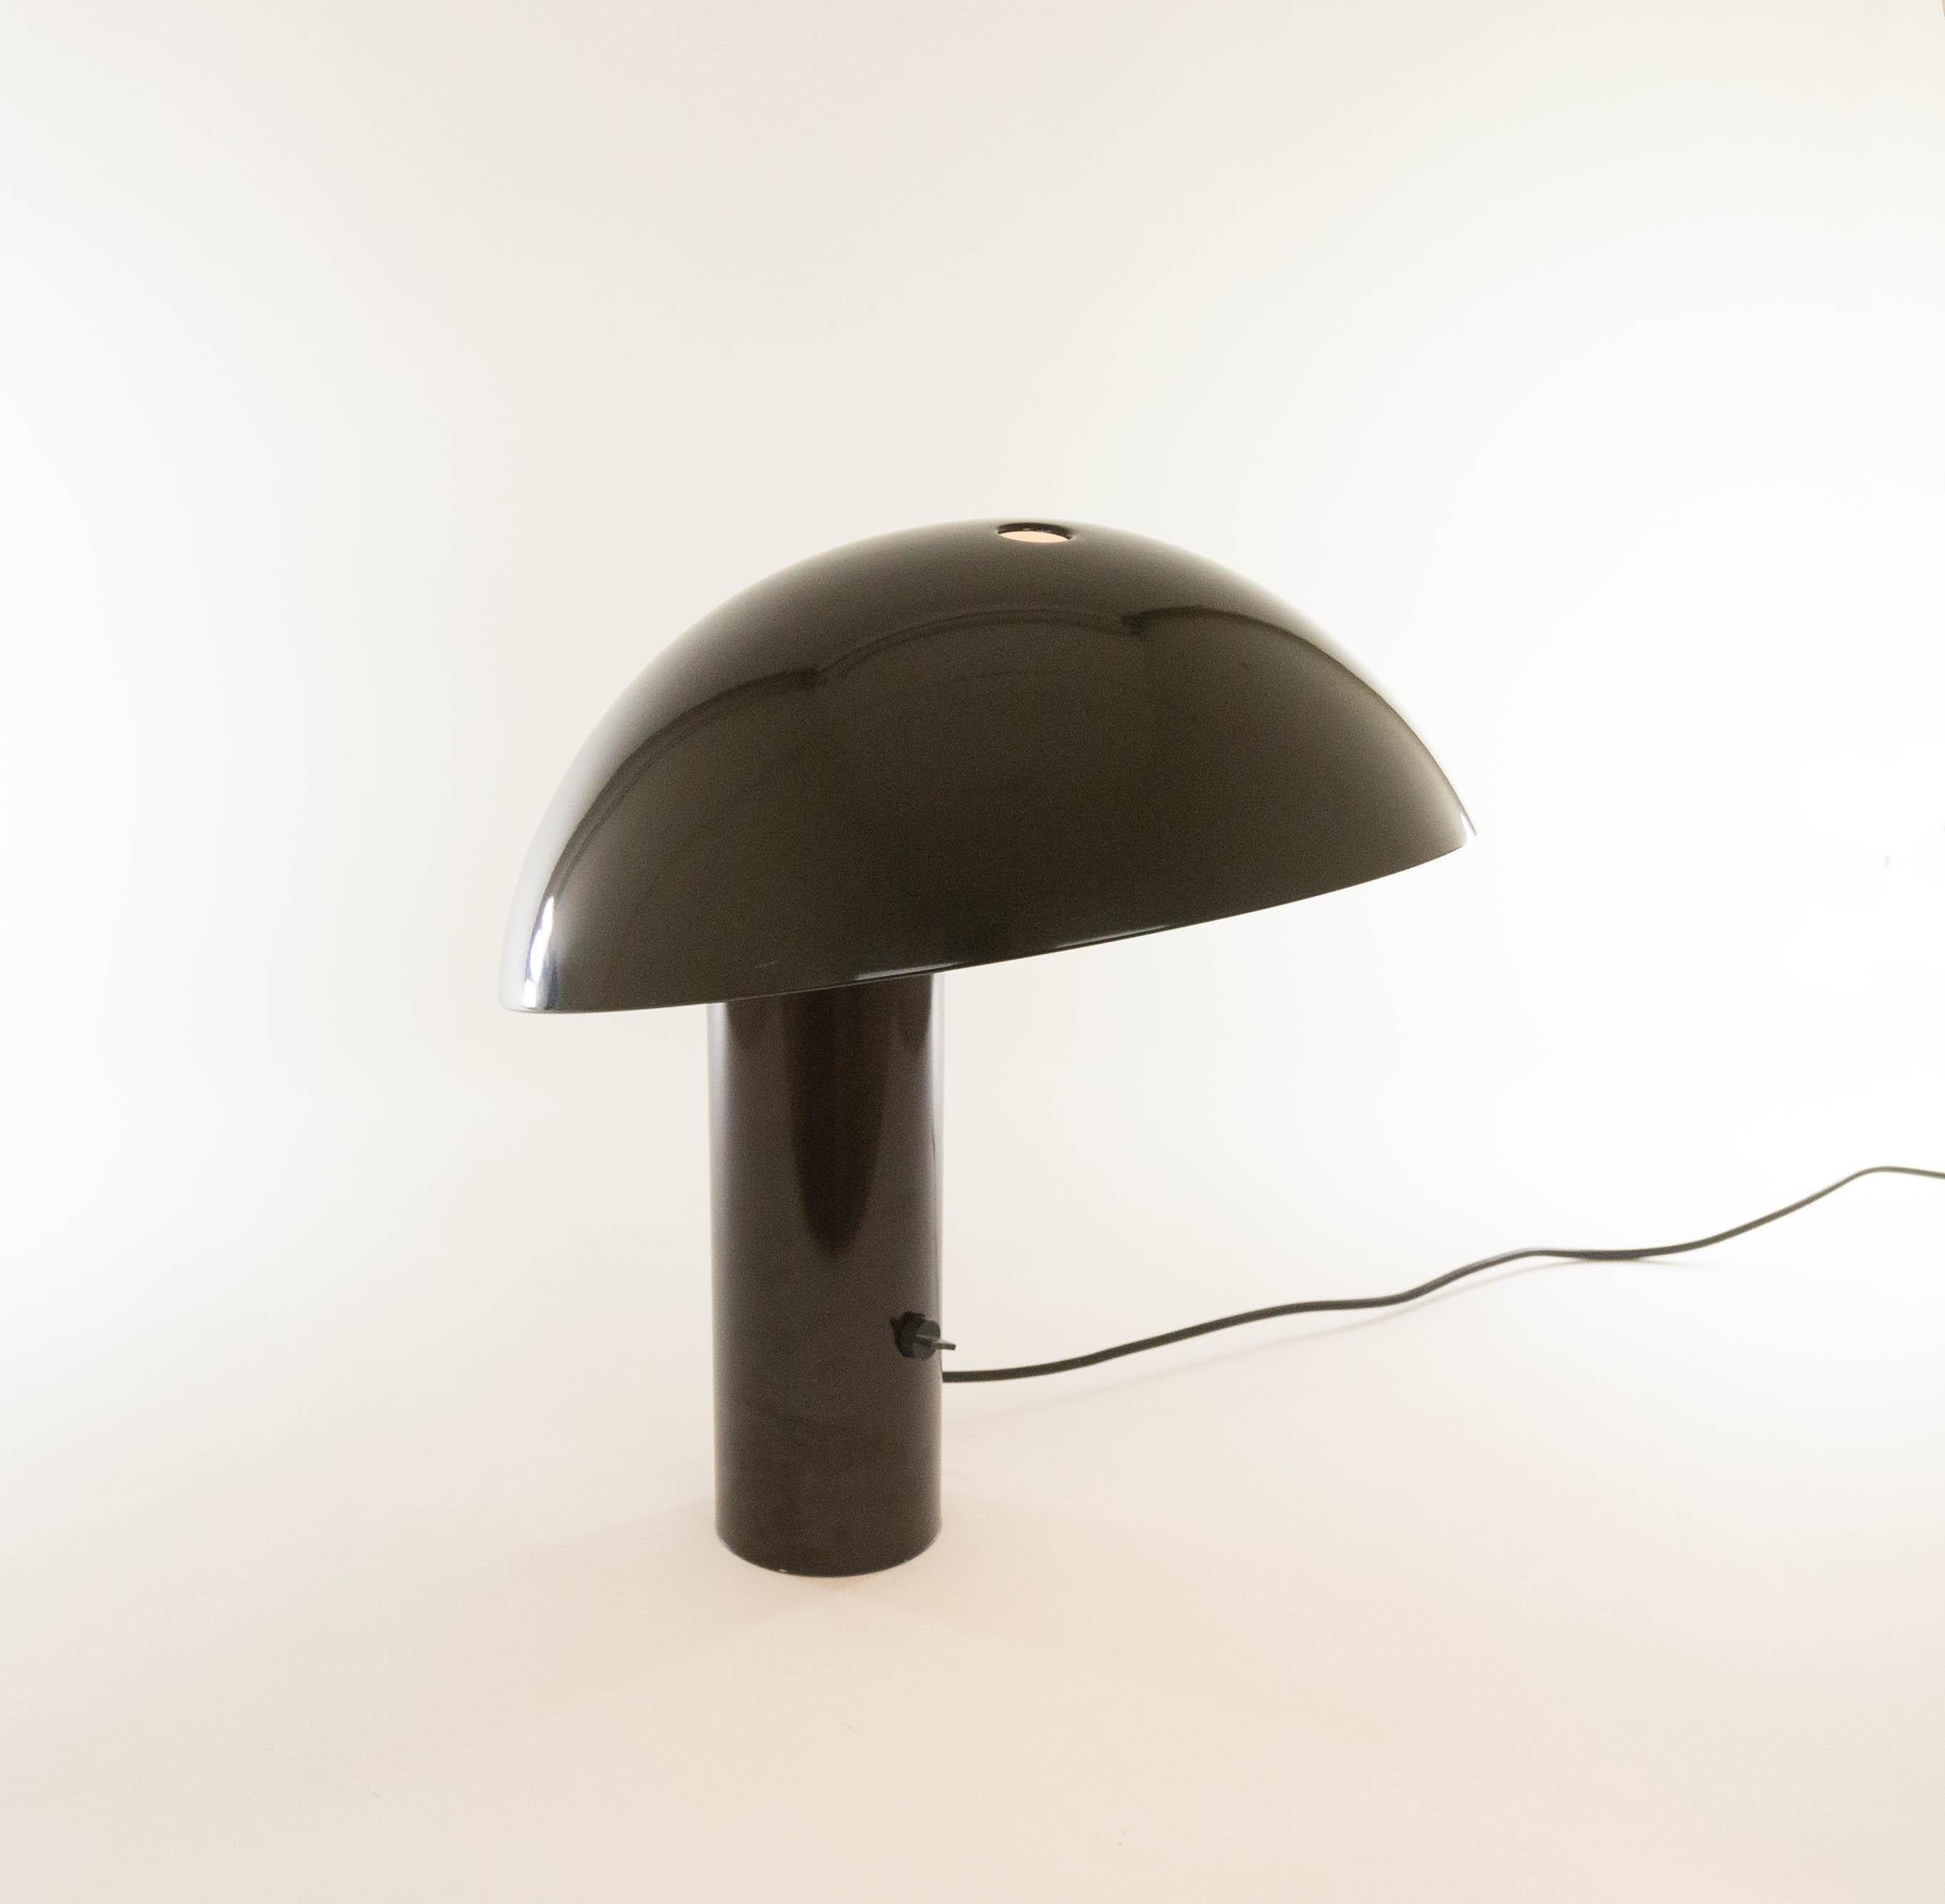 Lacquered Brown Vaga Table Lamp by Franco Mirenzi for Valenti, 1970s For Sale